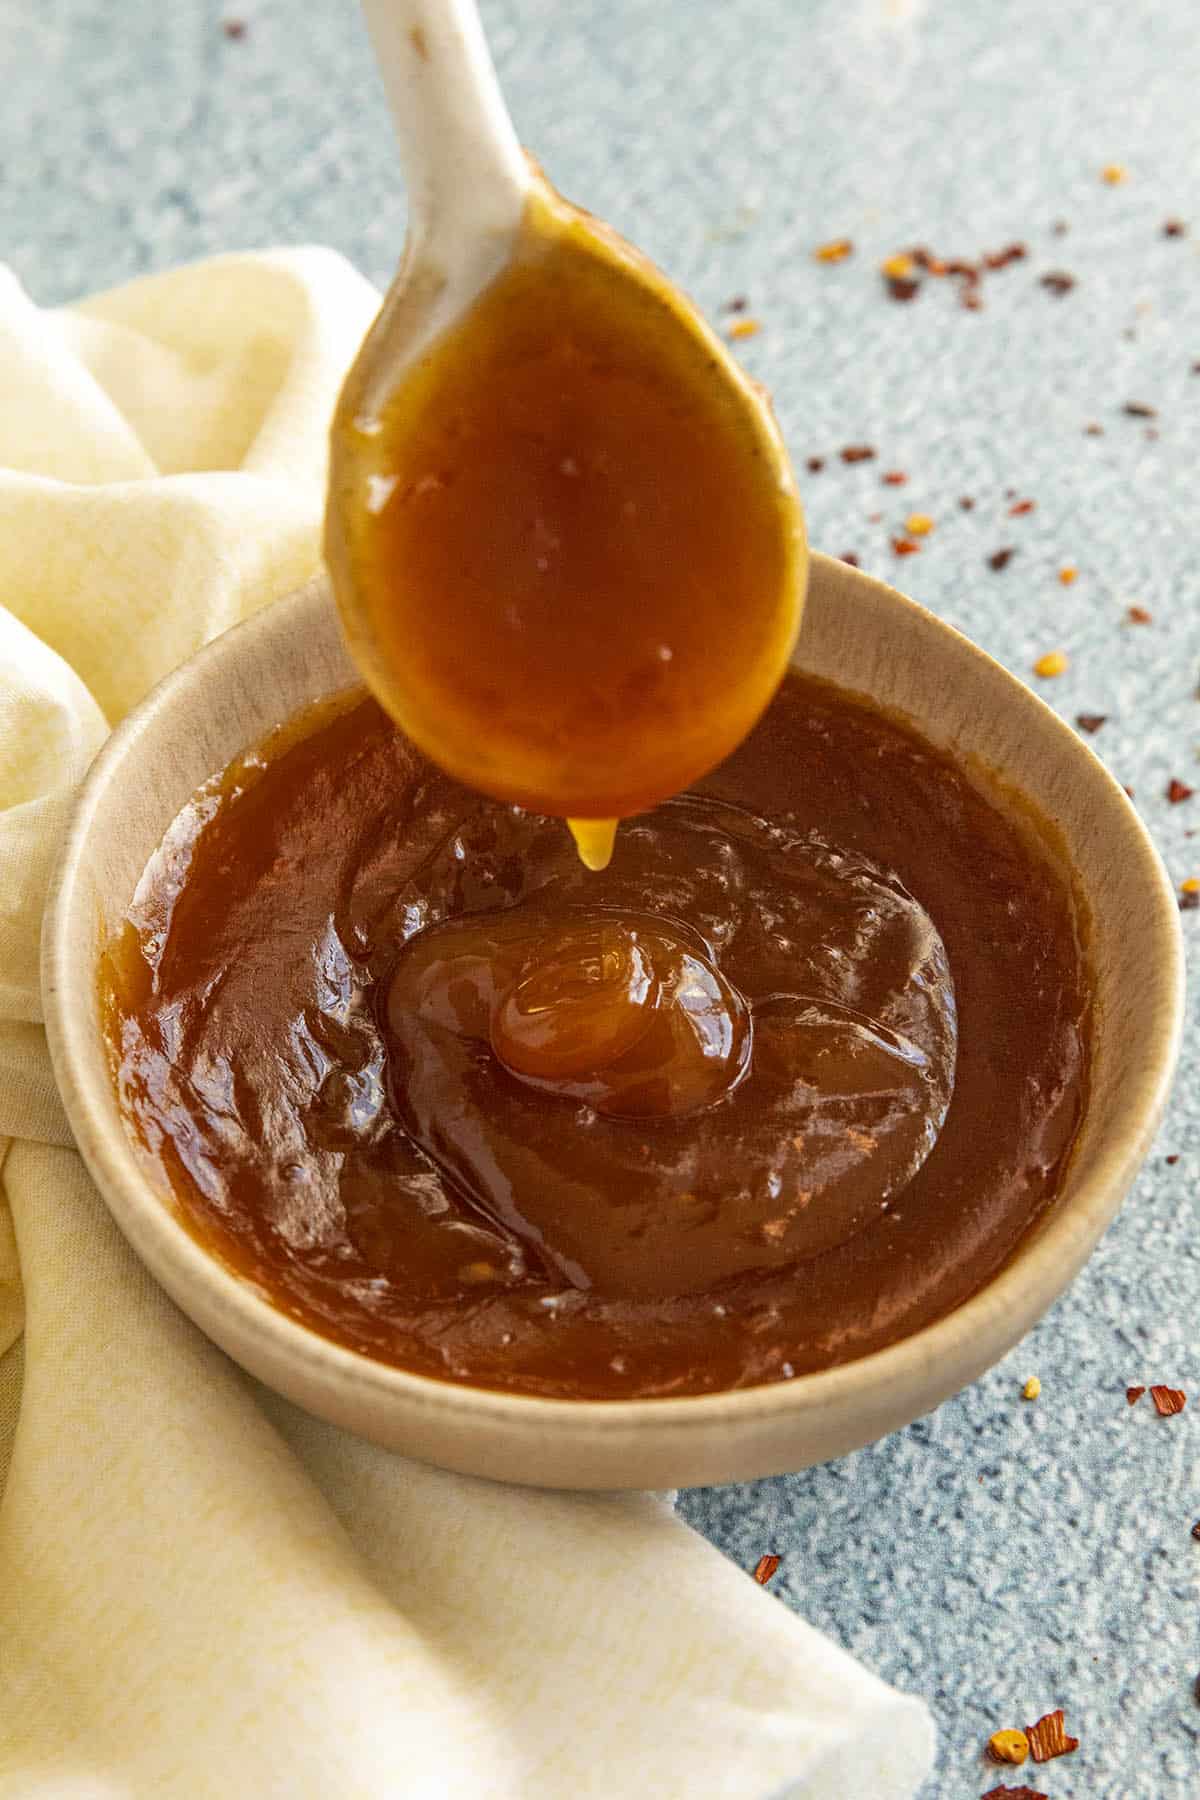 Sweet and Sour Sauce dripping from a spoon into a bowl